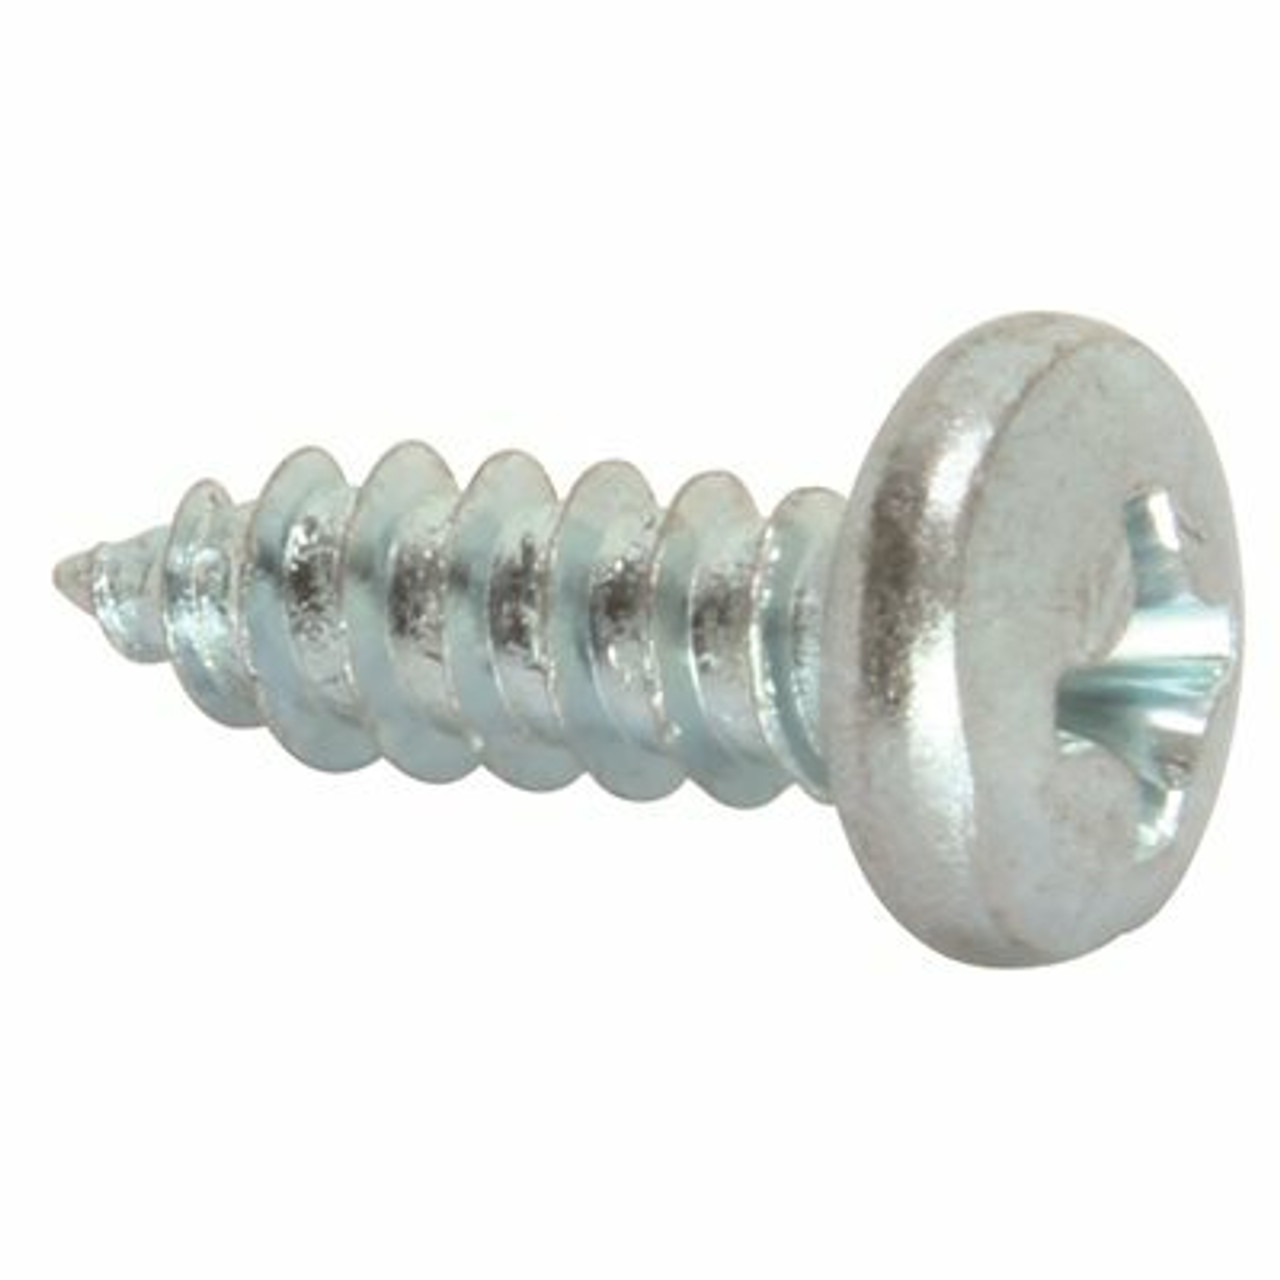 Lindstrom #12 X 1 In. Phillips Pan Head Self Tapping Screw (100 Per Box)